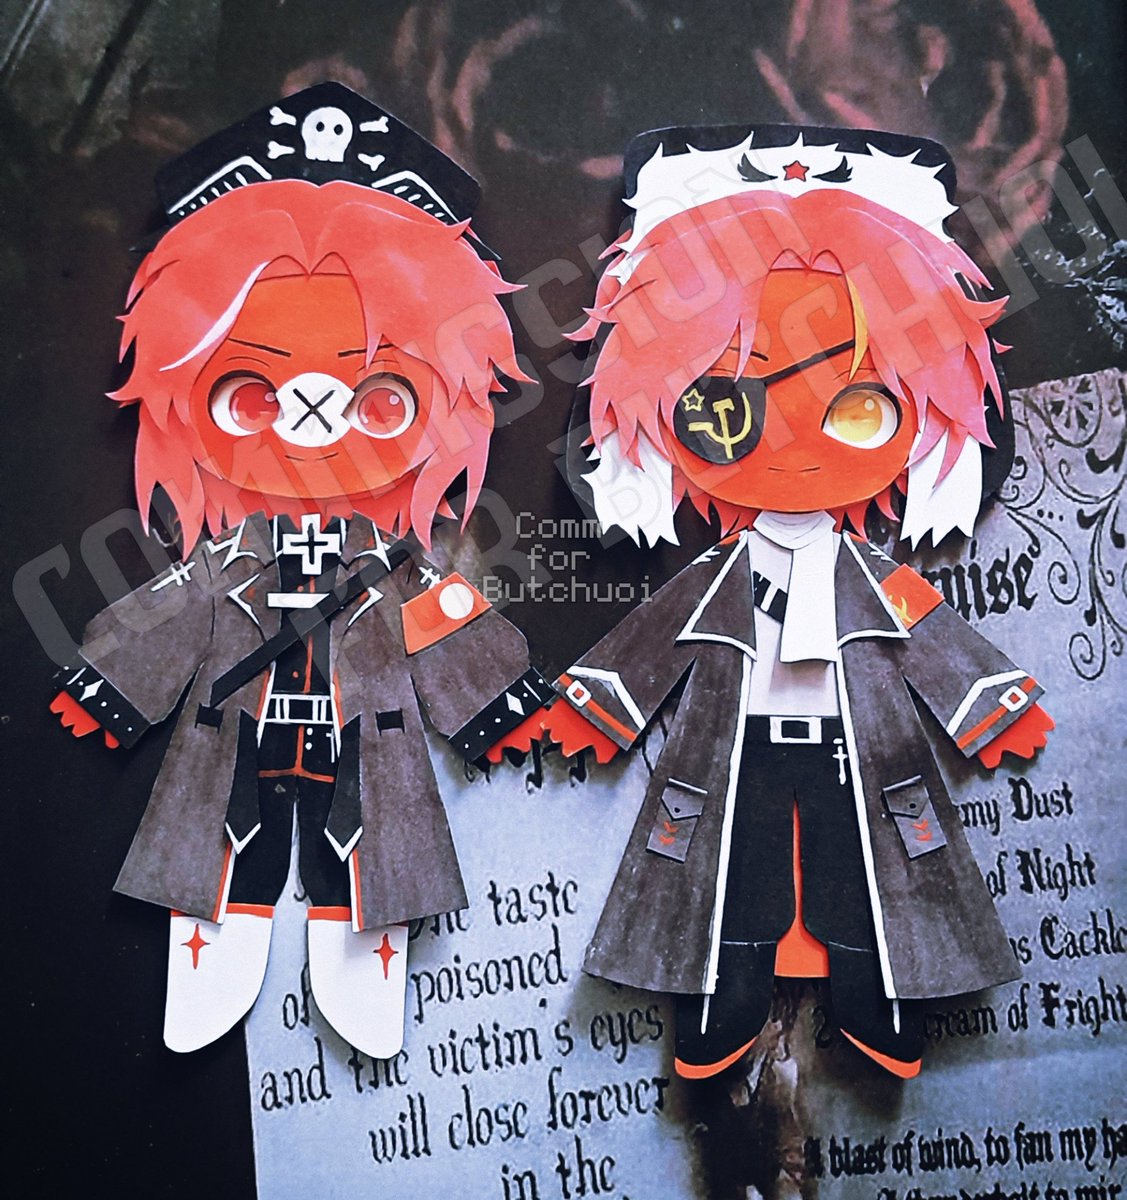 Pager-doll, they're so cute 😭💖

[COMMISSION-C] CHÀ NẾT ĐI

#countryhumans #ussrreich #ussrnazi #countryhumansussr #countryhumansnazi